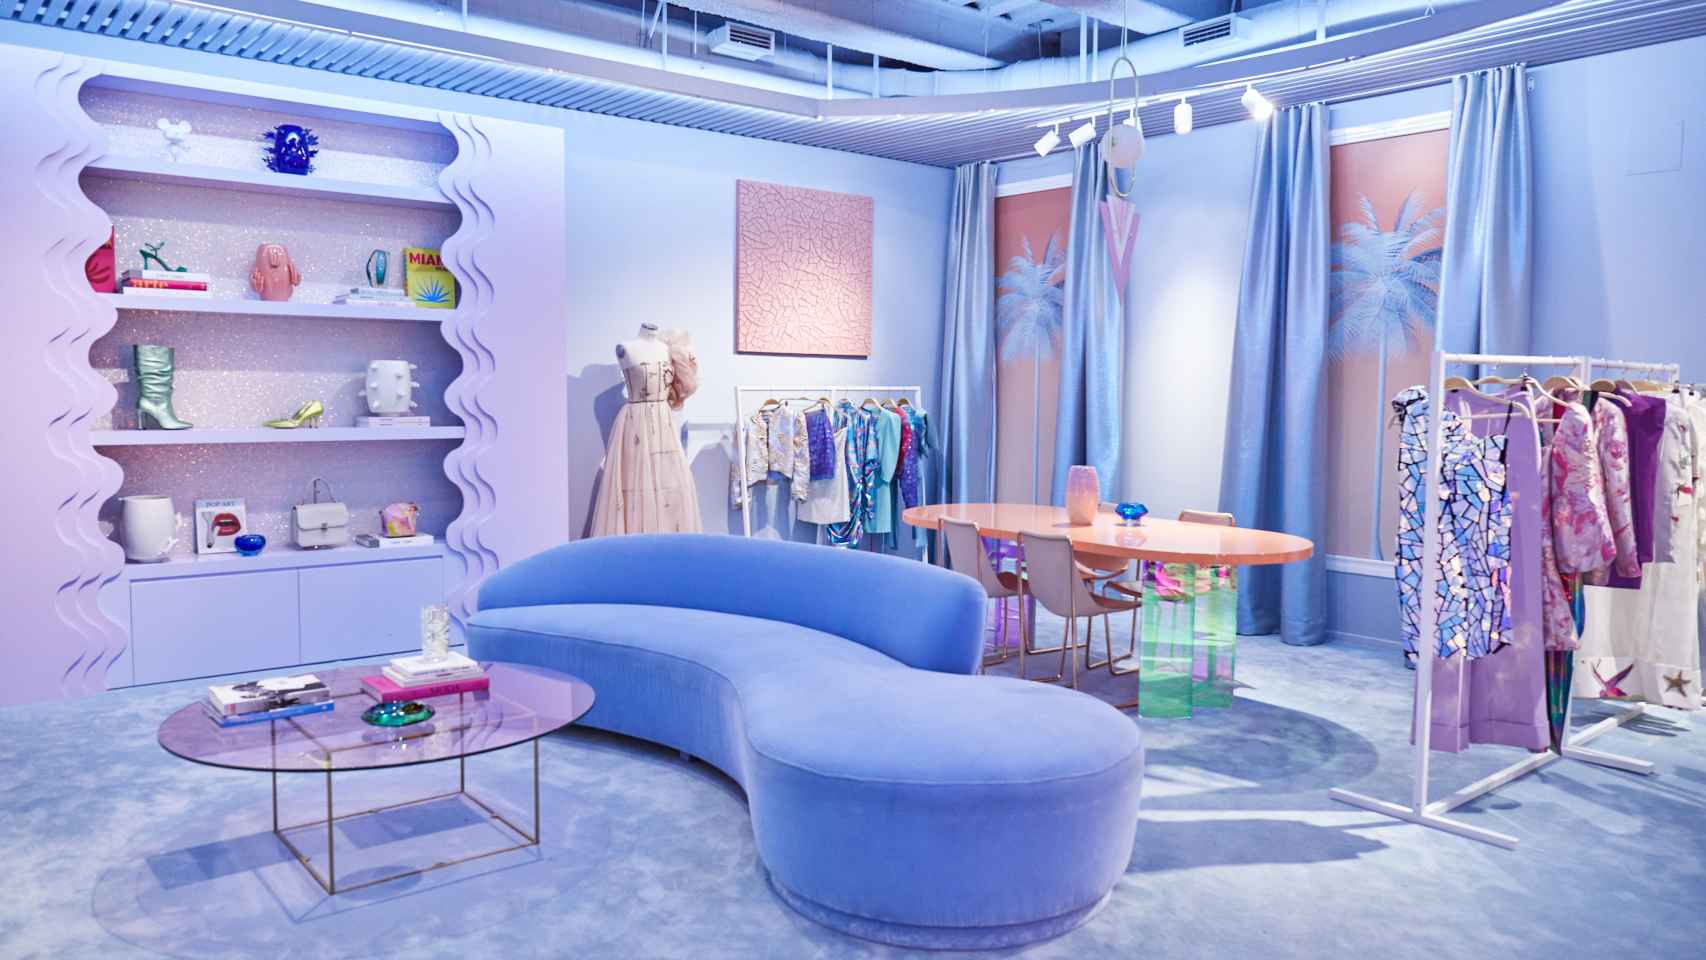 Vality Place (Showroom)